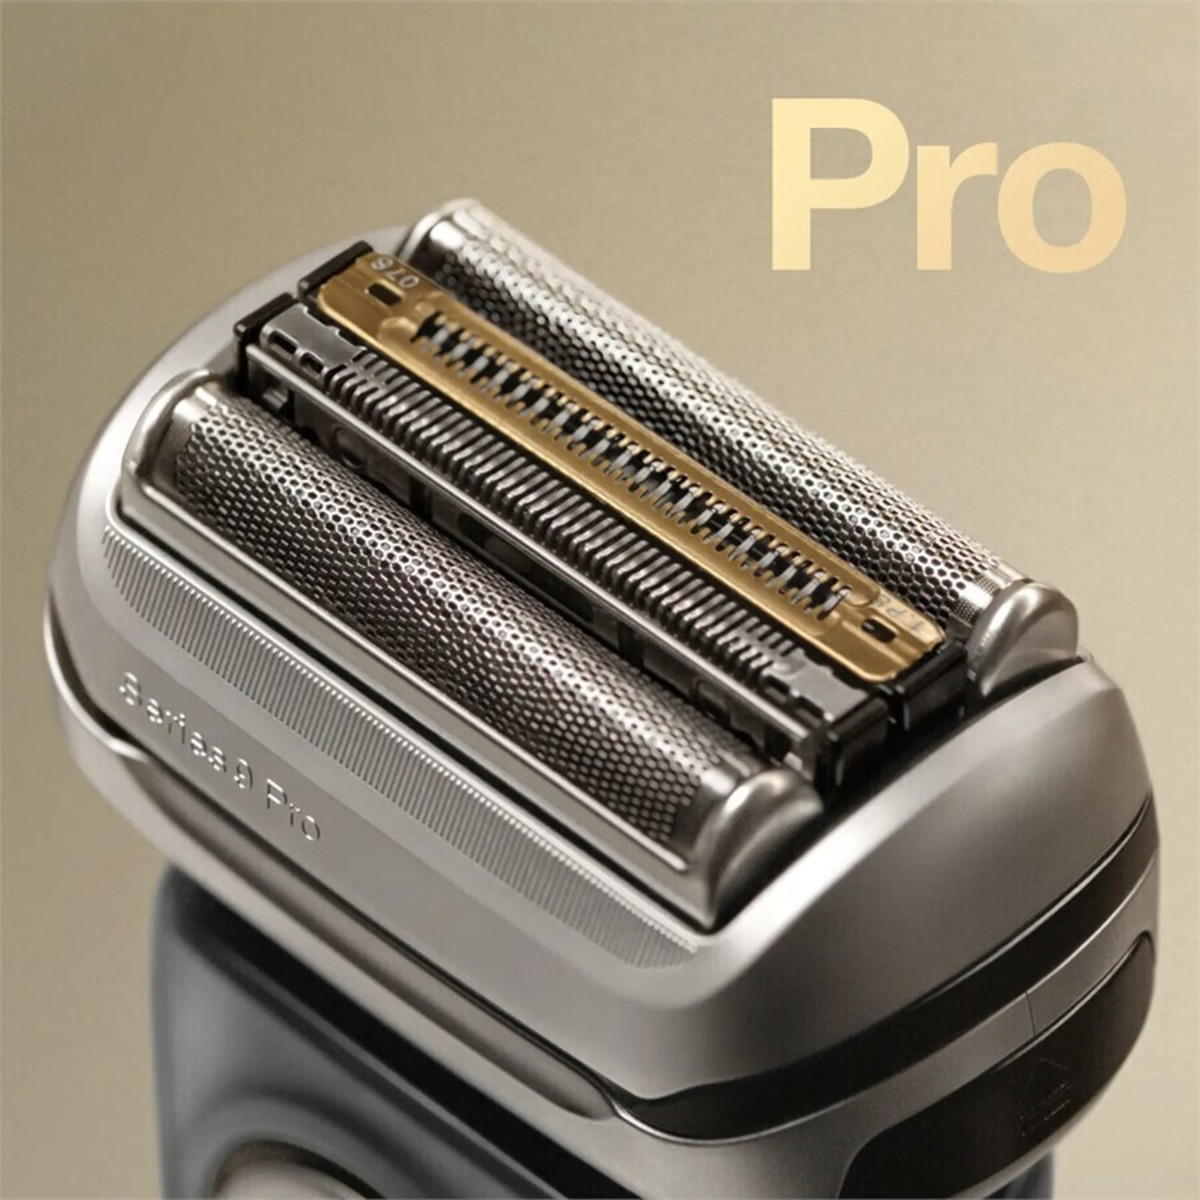 the-braun-series-9-pro-electric-razor-a-top-choice-for-a-smooth-shave